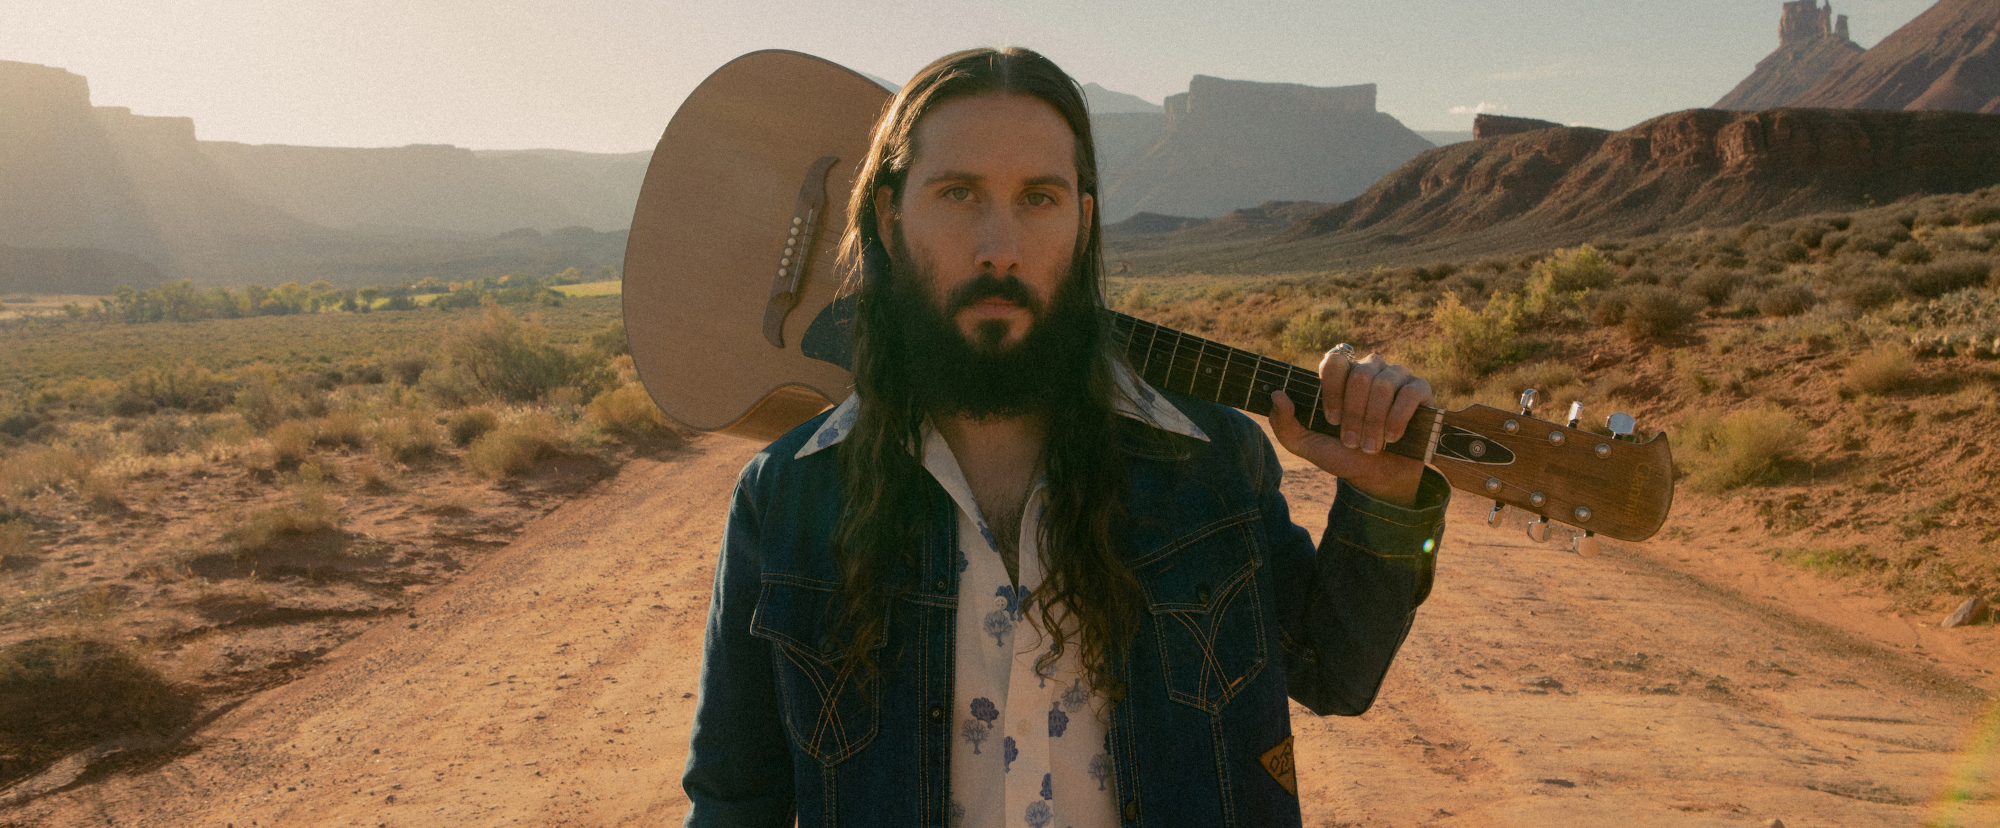 Avi Kaplan Talks Individuality, Working with Shooter Jennings, and New Single “On My Way”